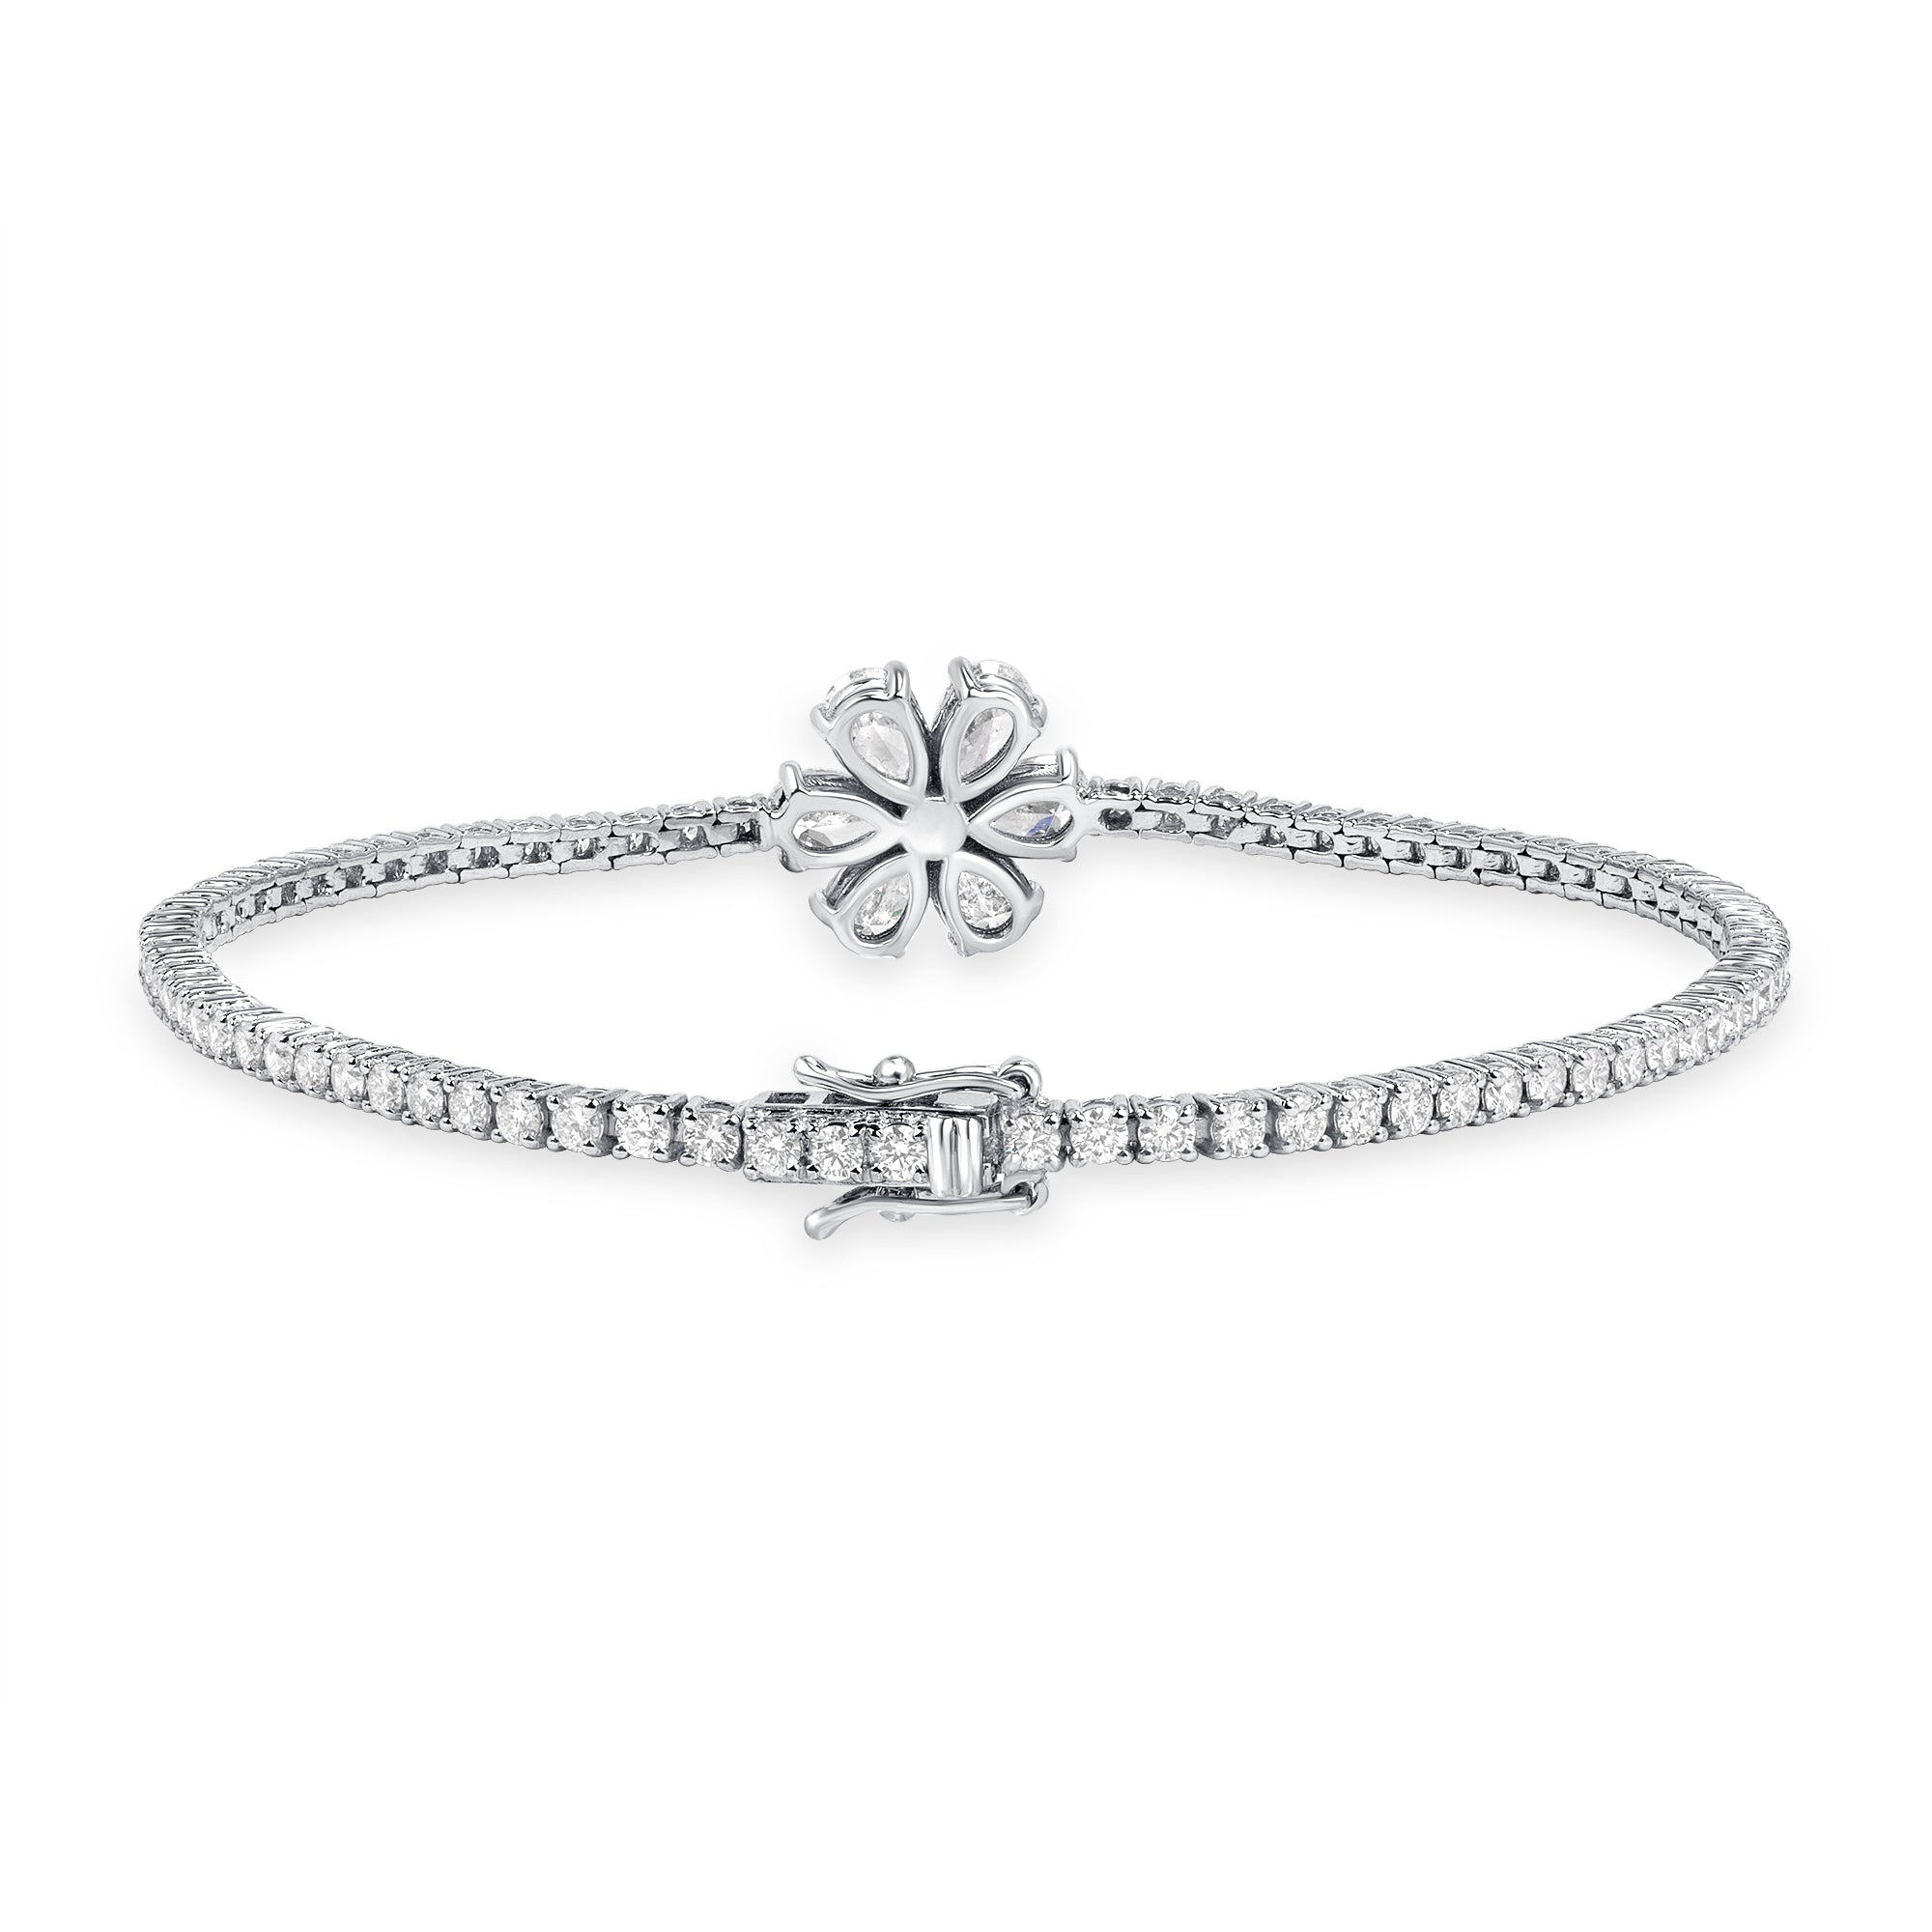 4.00ctw Mixed Cut Diamond Tennis Bracelet With Flower Accent Stone in 18K White Gold